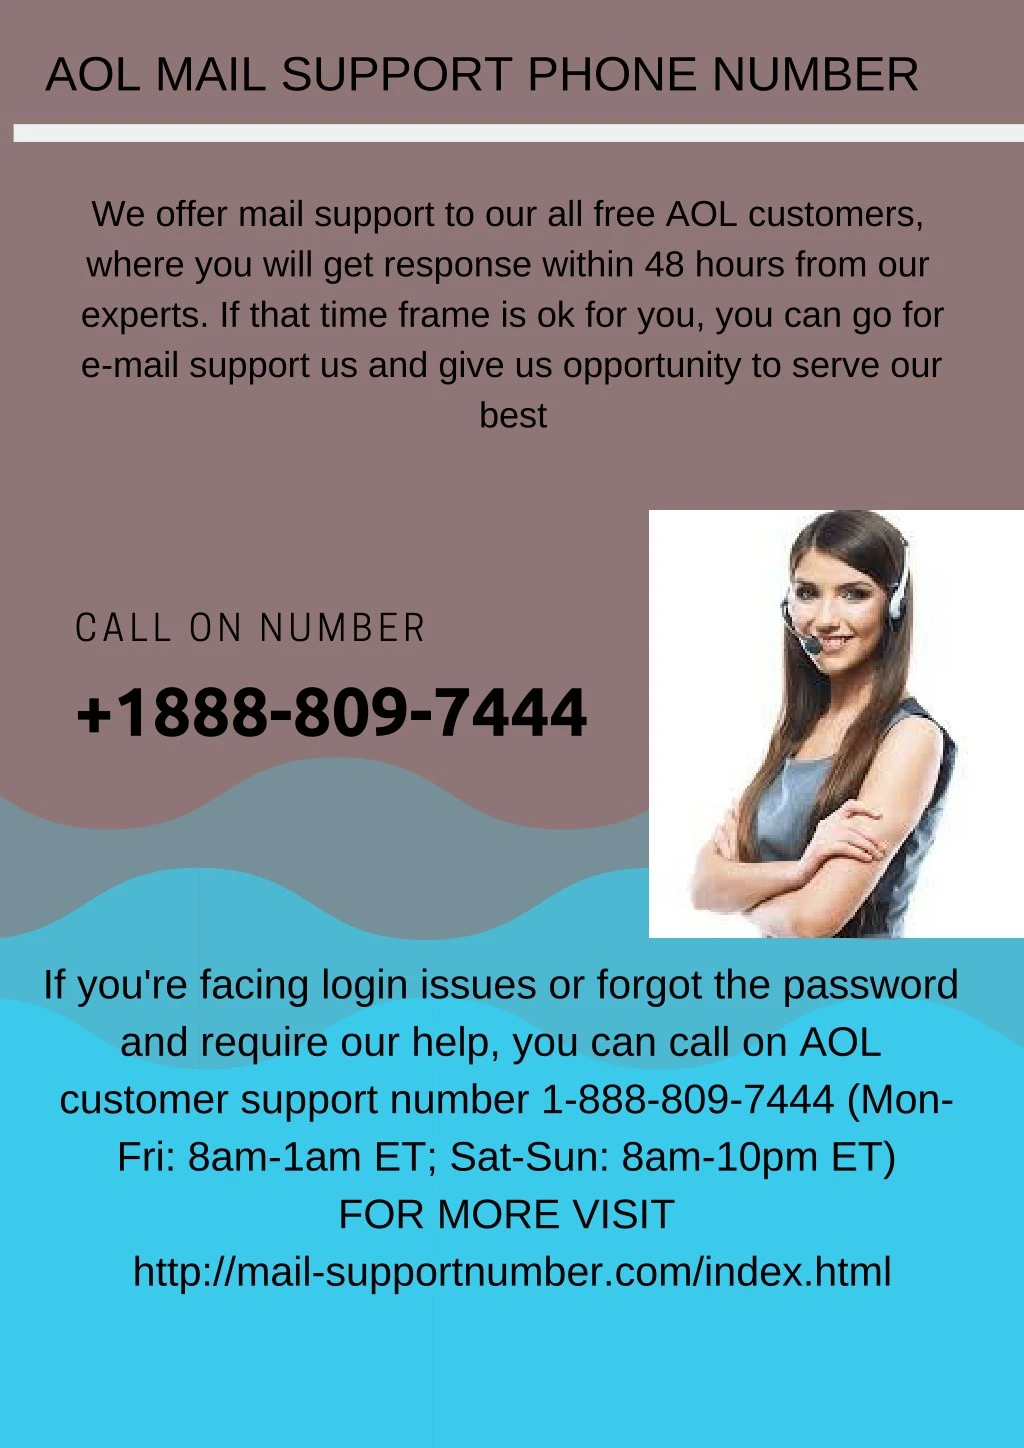 aol mail support phone number